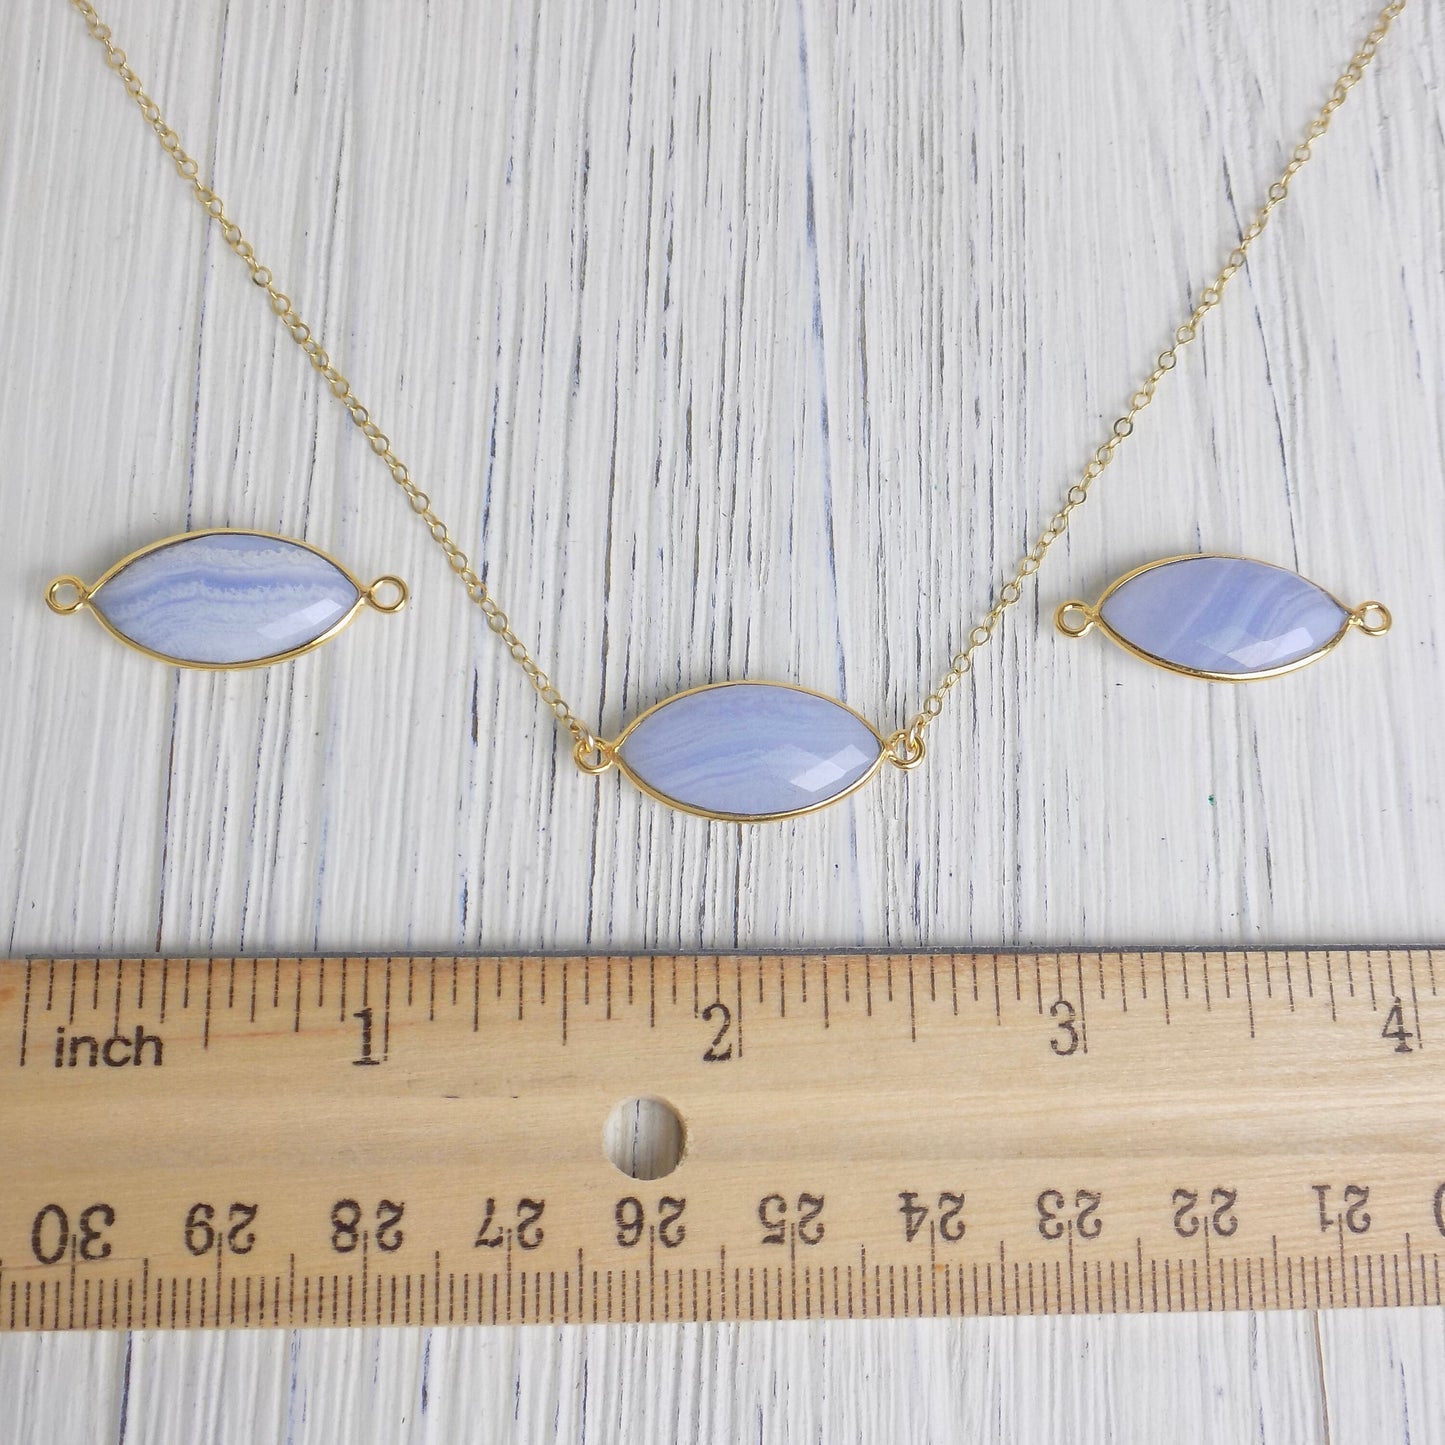 Calming Blue Lace Agate Natural Gemstone Necklace 14K Gold Filled Chain, Gift For Mom, M5-373